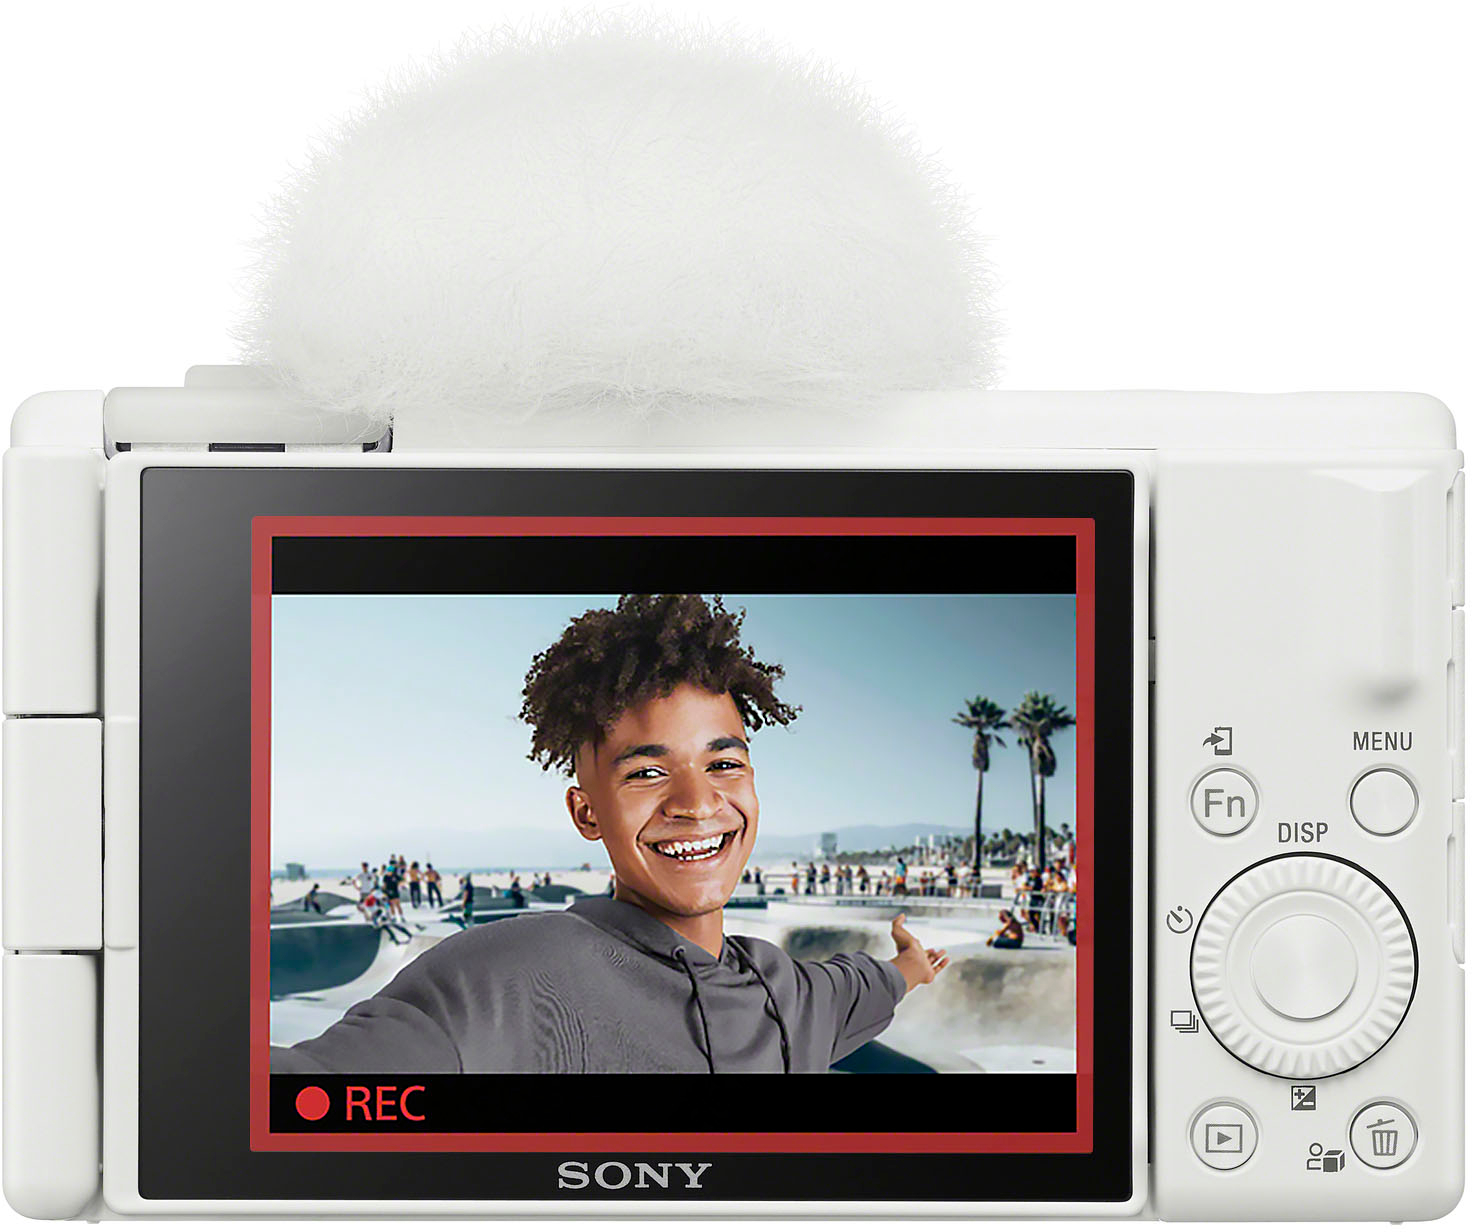 New Sony ZV-1F: A Compact Camera for Content Creator - 42West